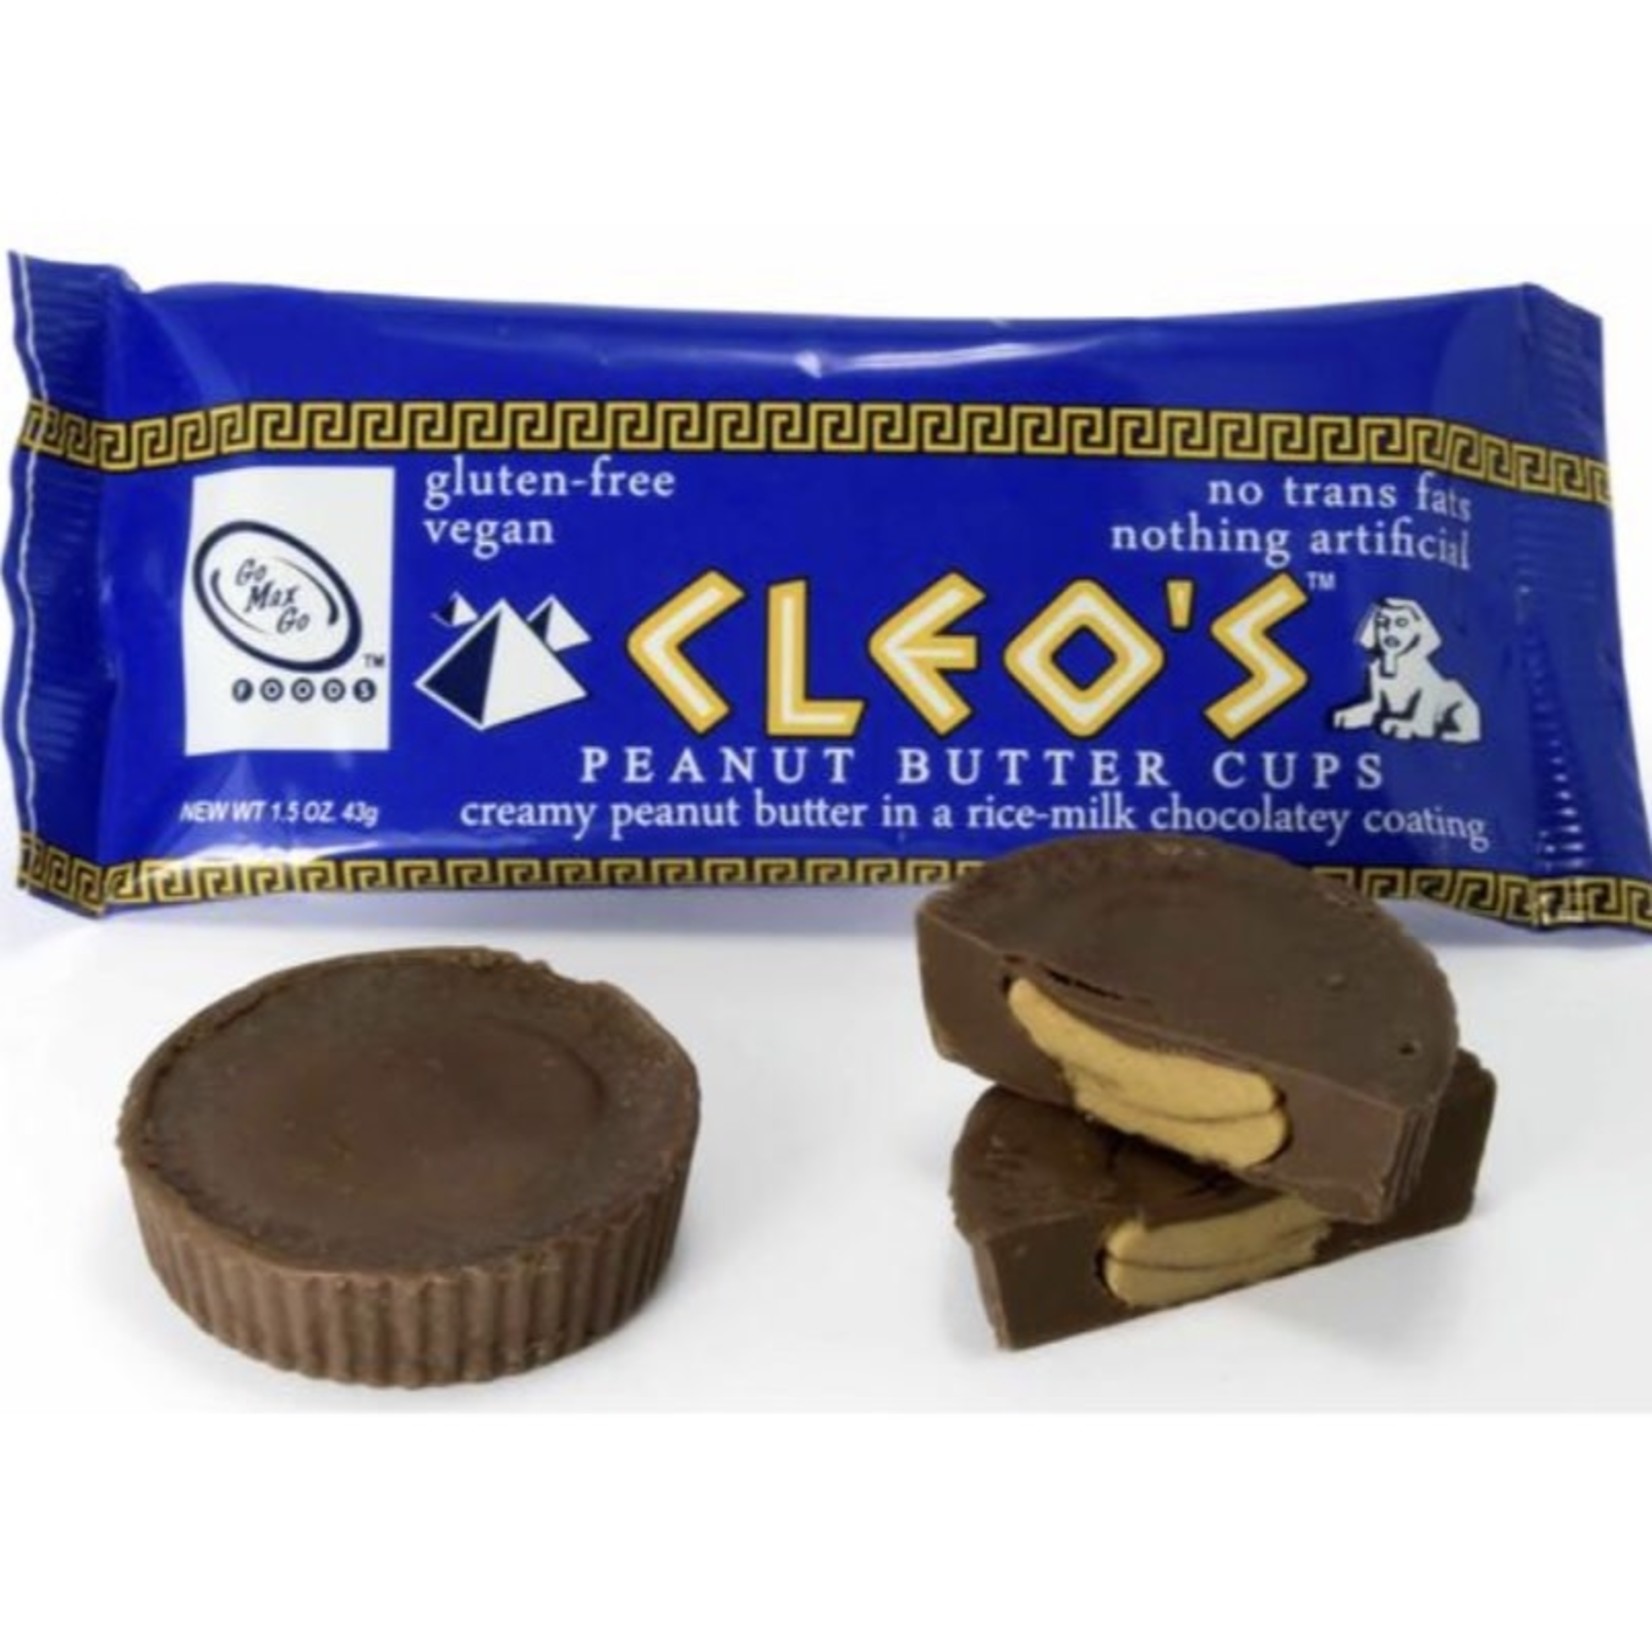 Go Max Go Cleo’s Peanut Butter Cups